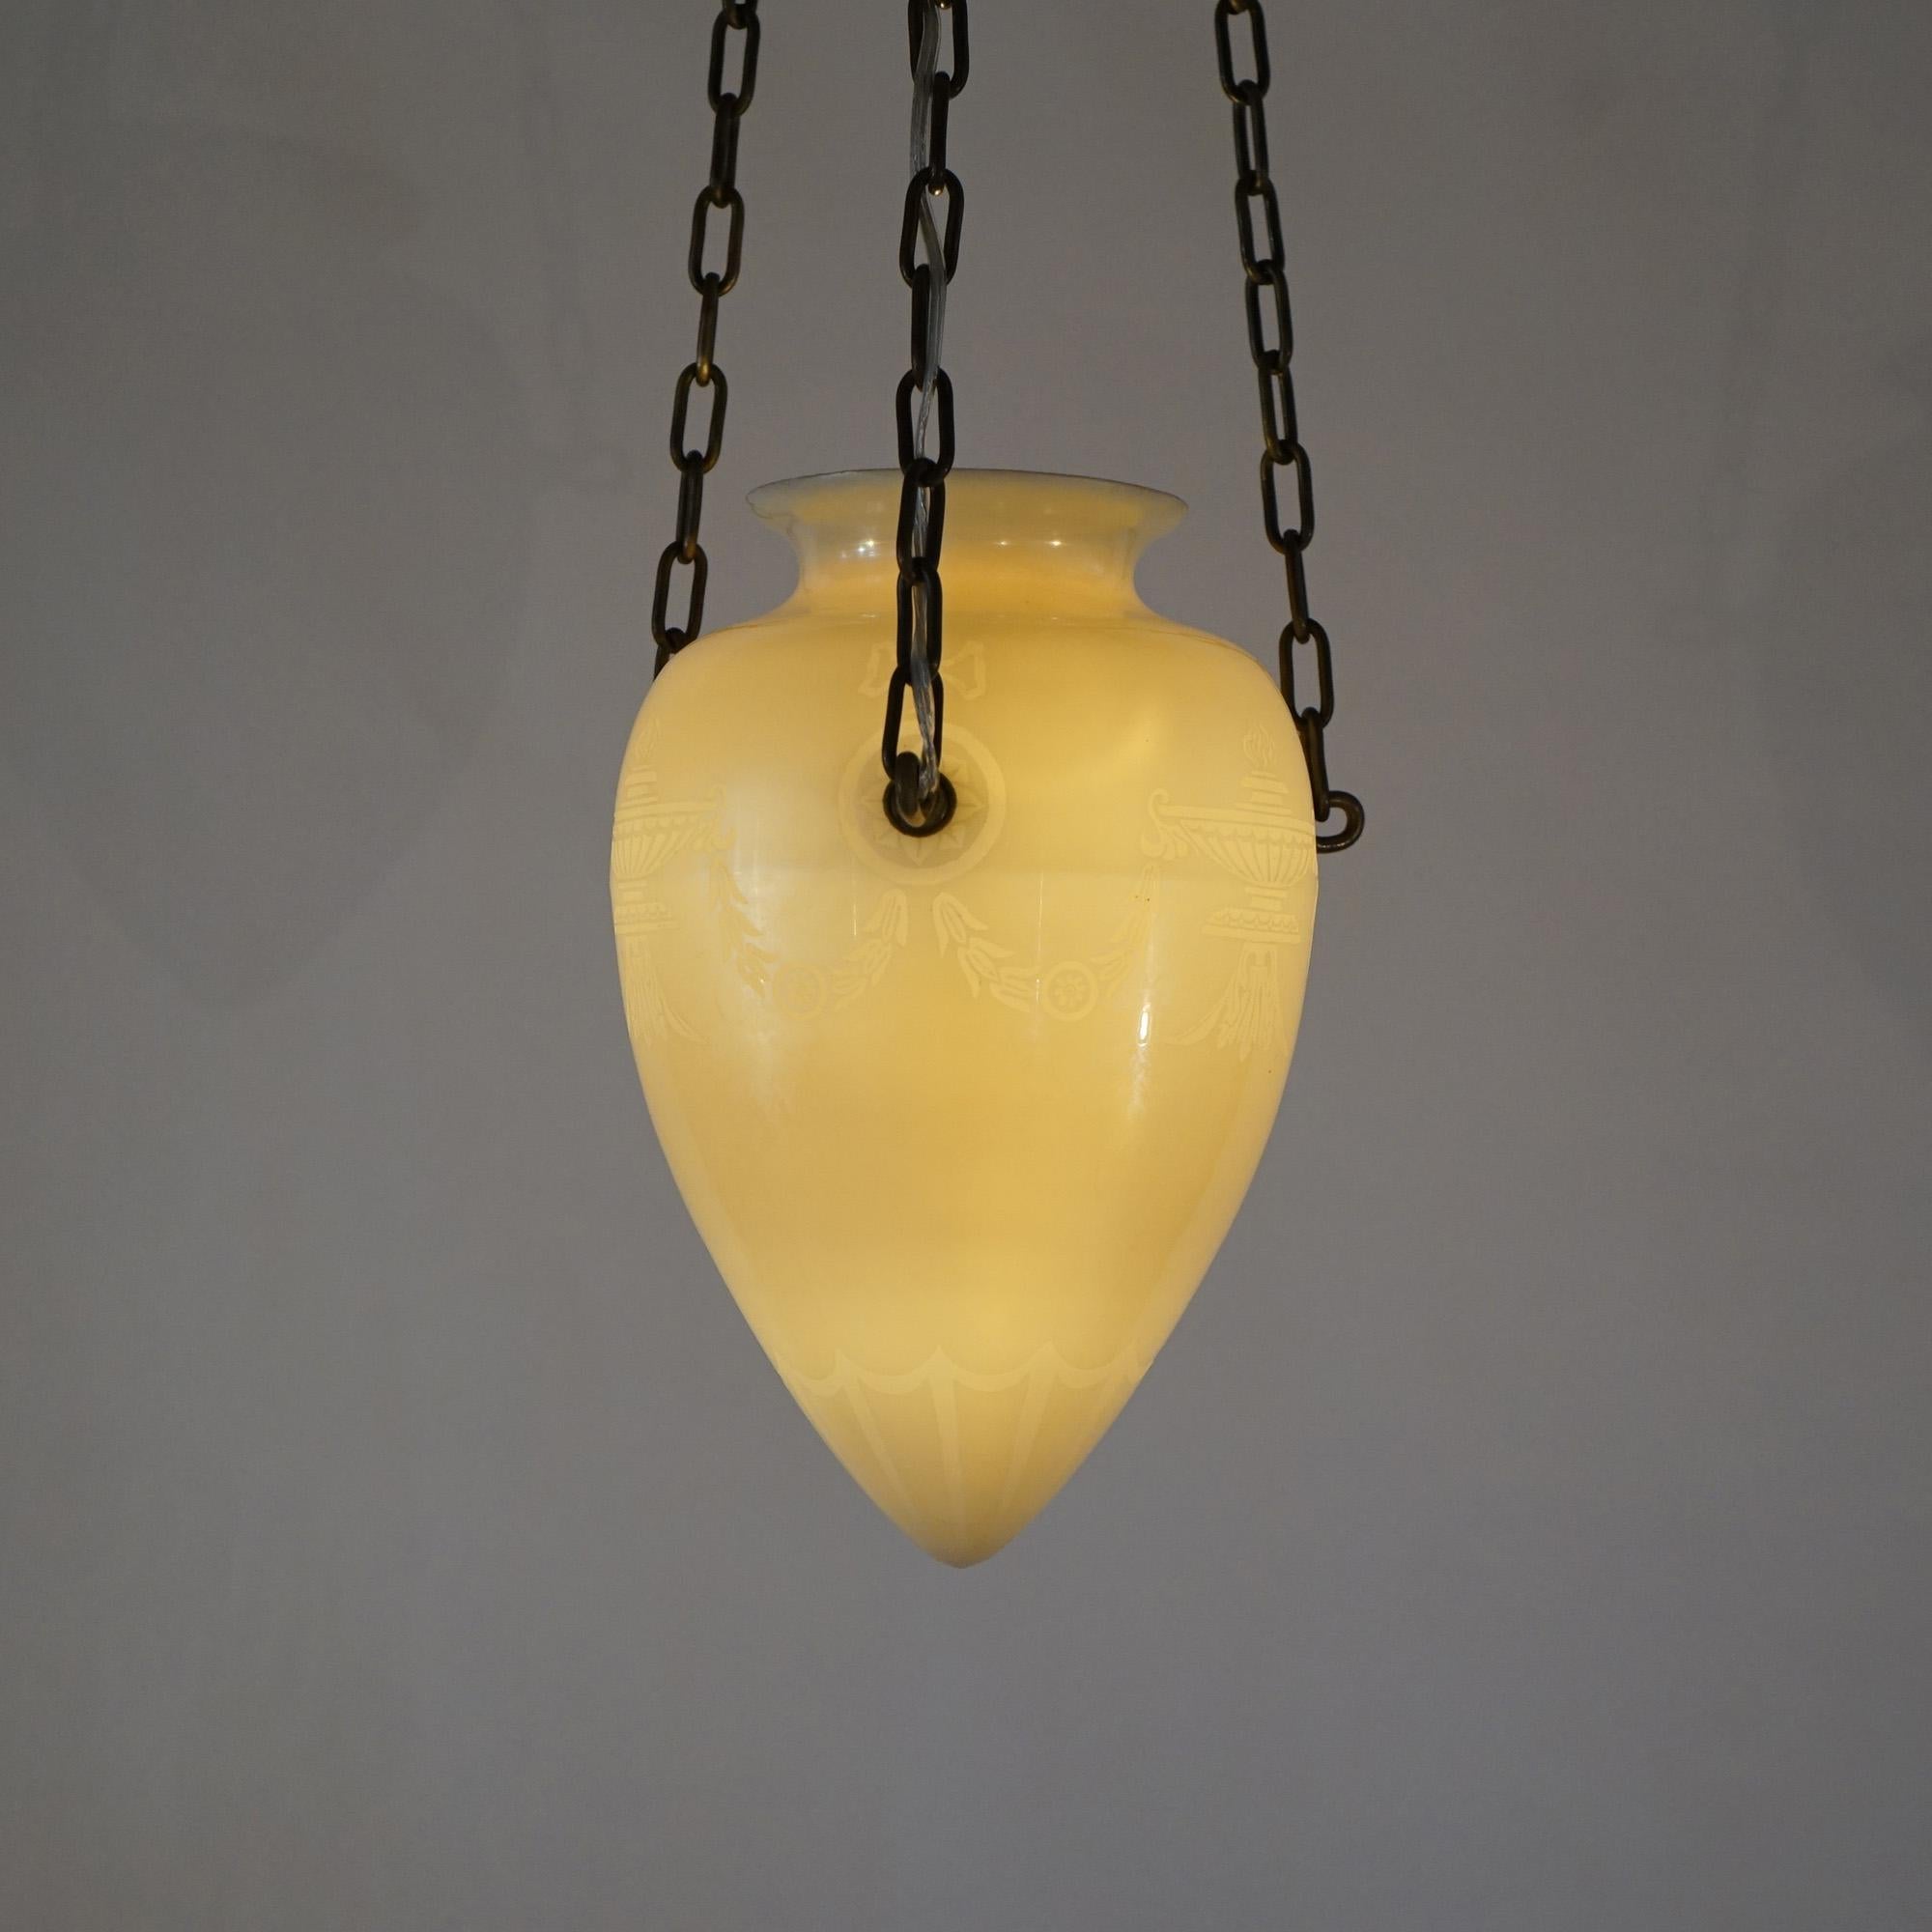 An antique Steuben  pendant light offers calcite art glass construction in tear drop form and having etched Classical design, suspended by three drop chains, c1920

Measures - 33.5